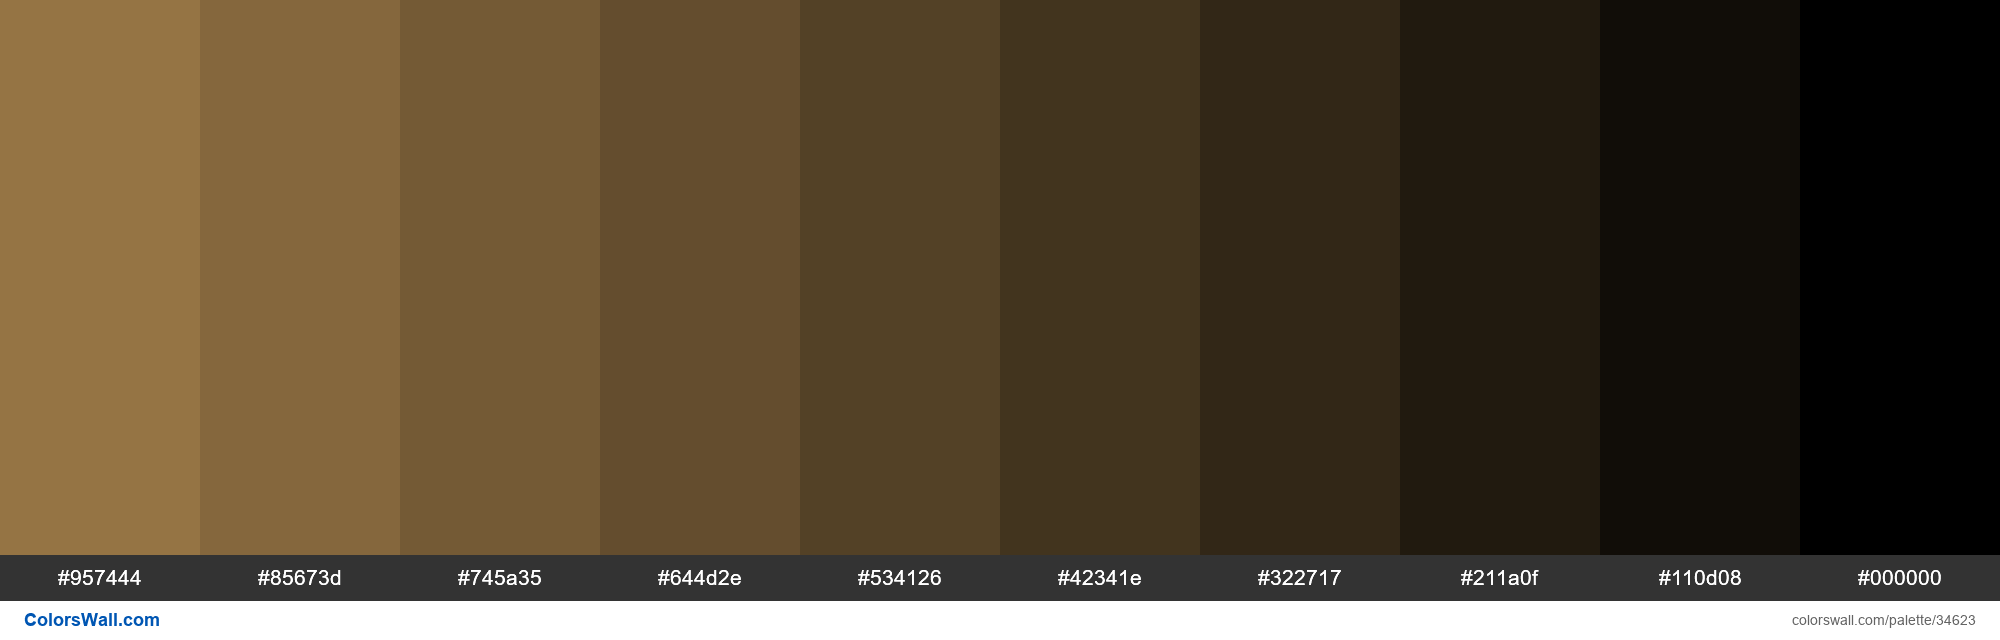 Shades XKCD Color coffee #a6814c hex - #34623